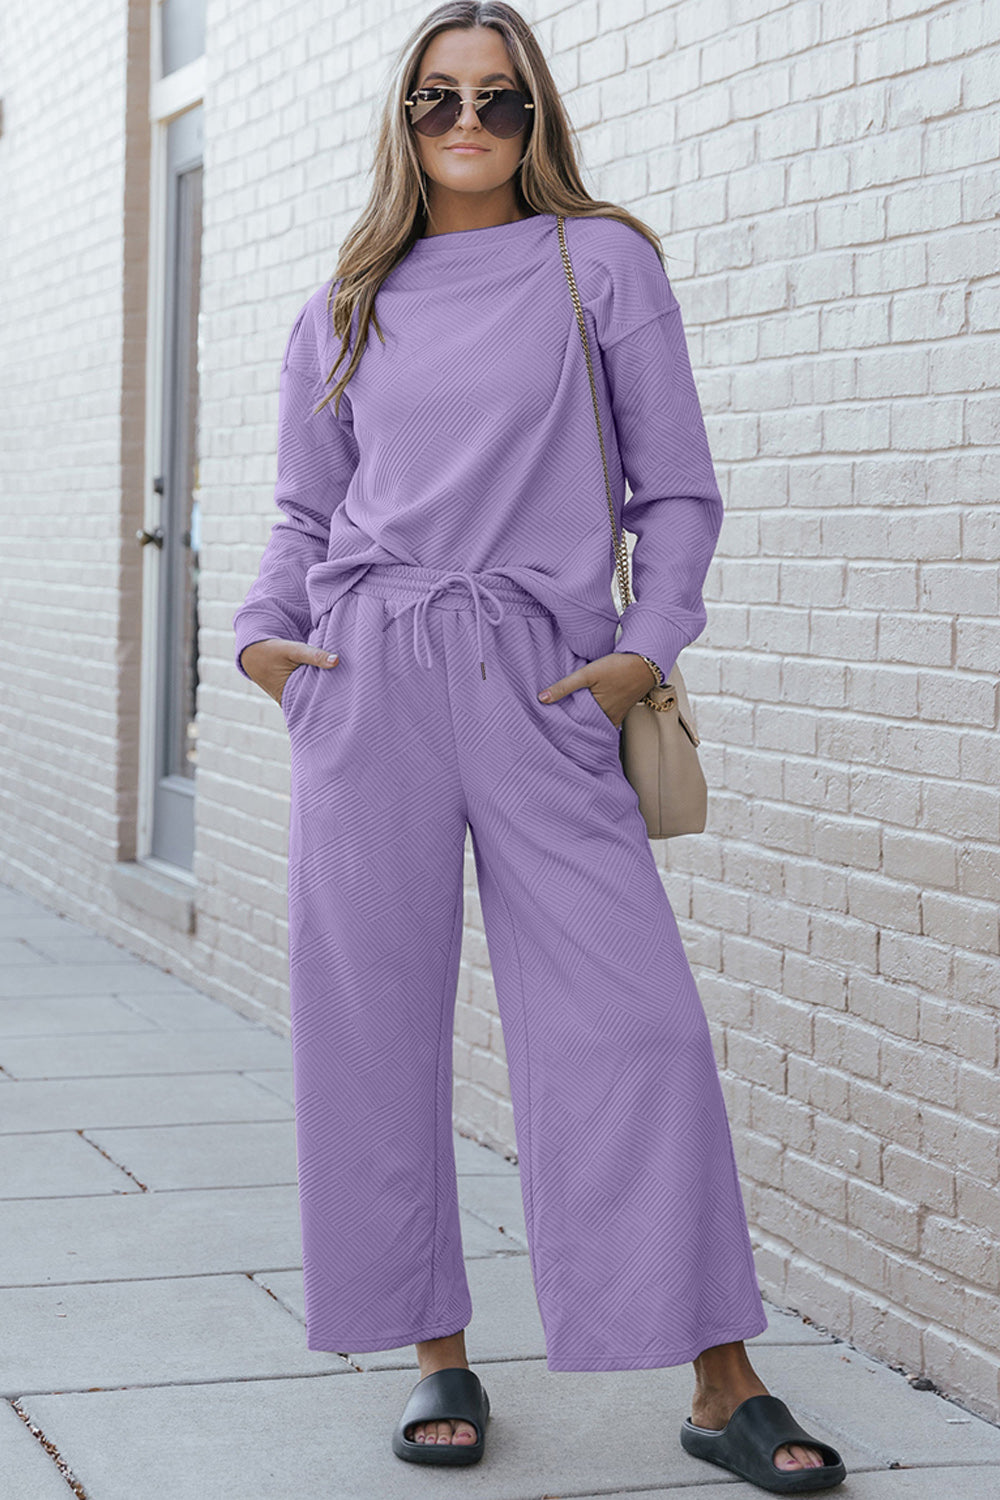 Double Take Full Size Textured Long Sleeve Top and Drawstring Pants Set - Three Bears Boutique